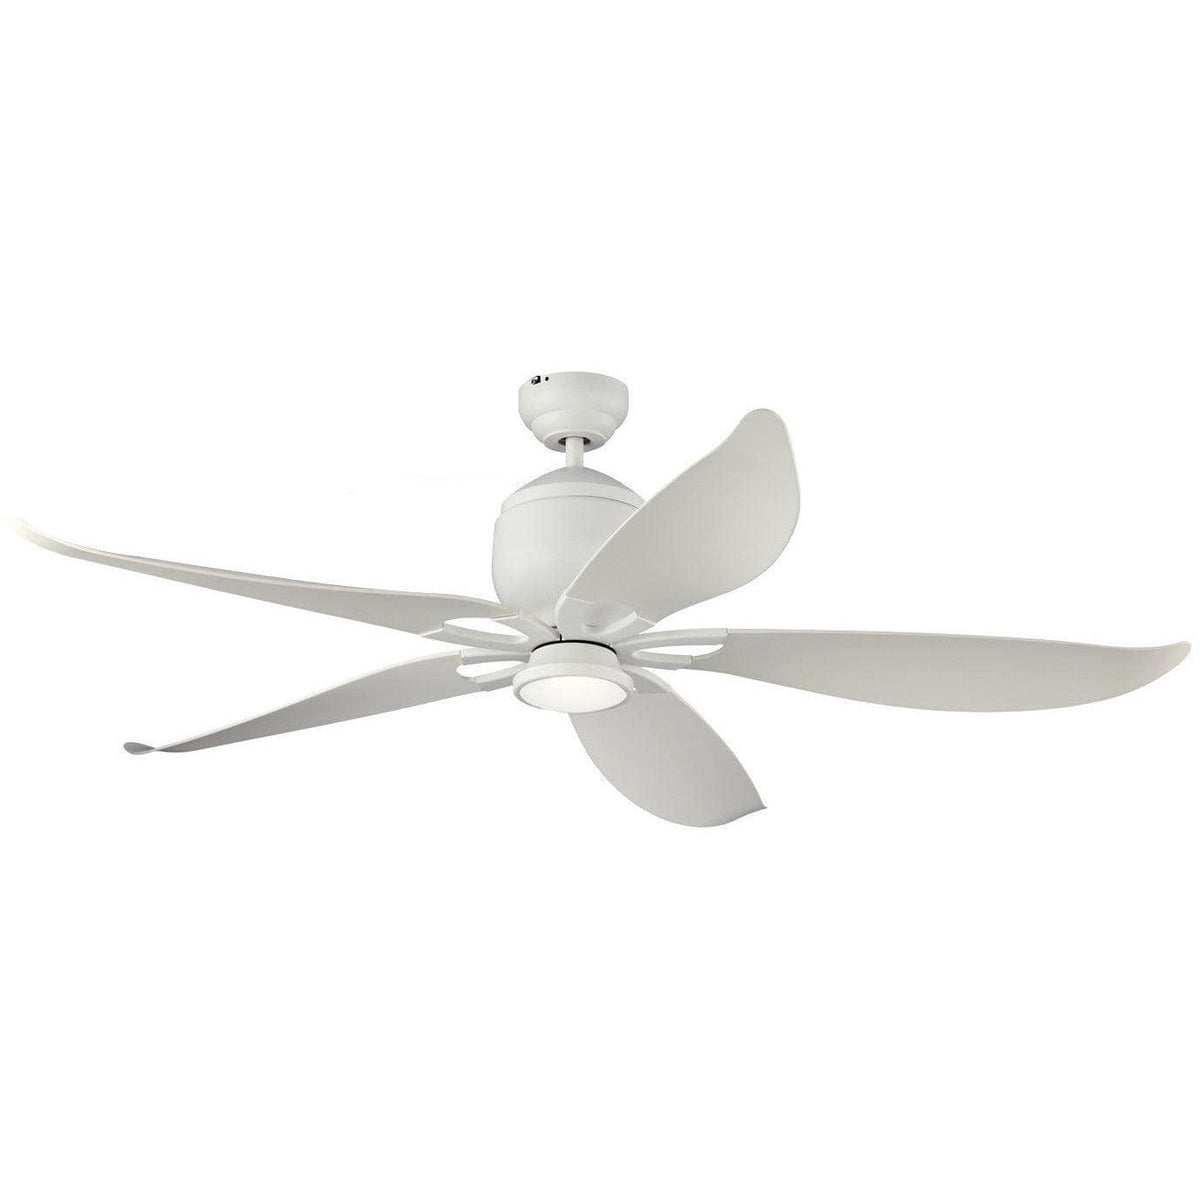 Visual Comfort Fan Collection - Lily 56" Ceiling Fan - 5LLR56RZWD-V1 | Montreal Lighting & Hardware